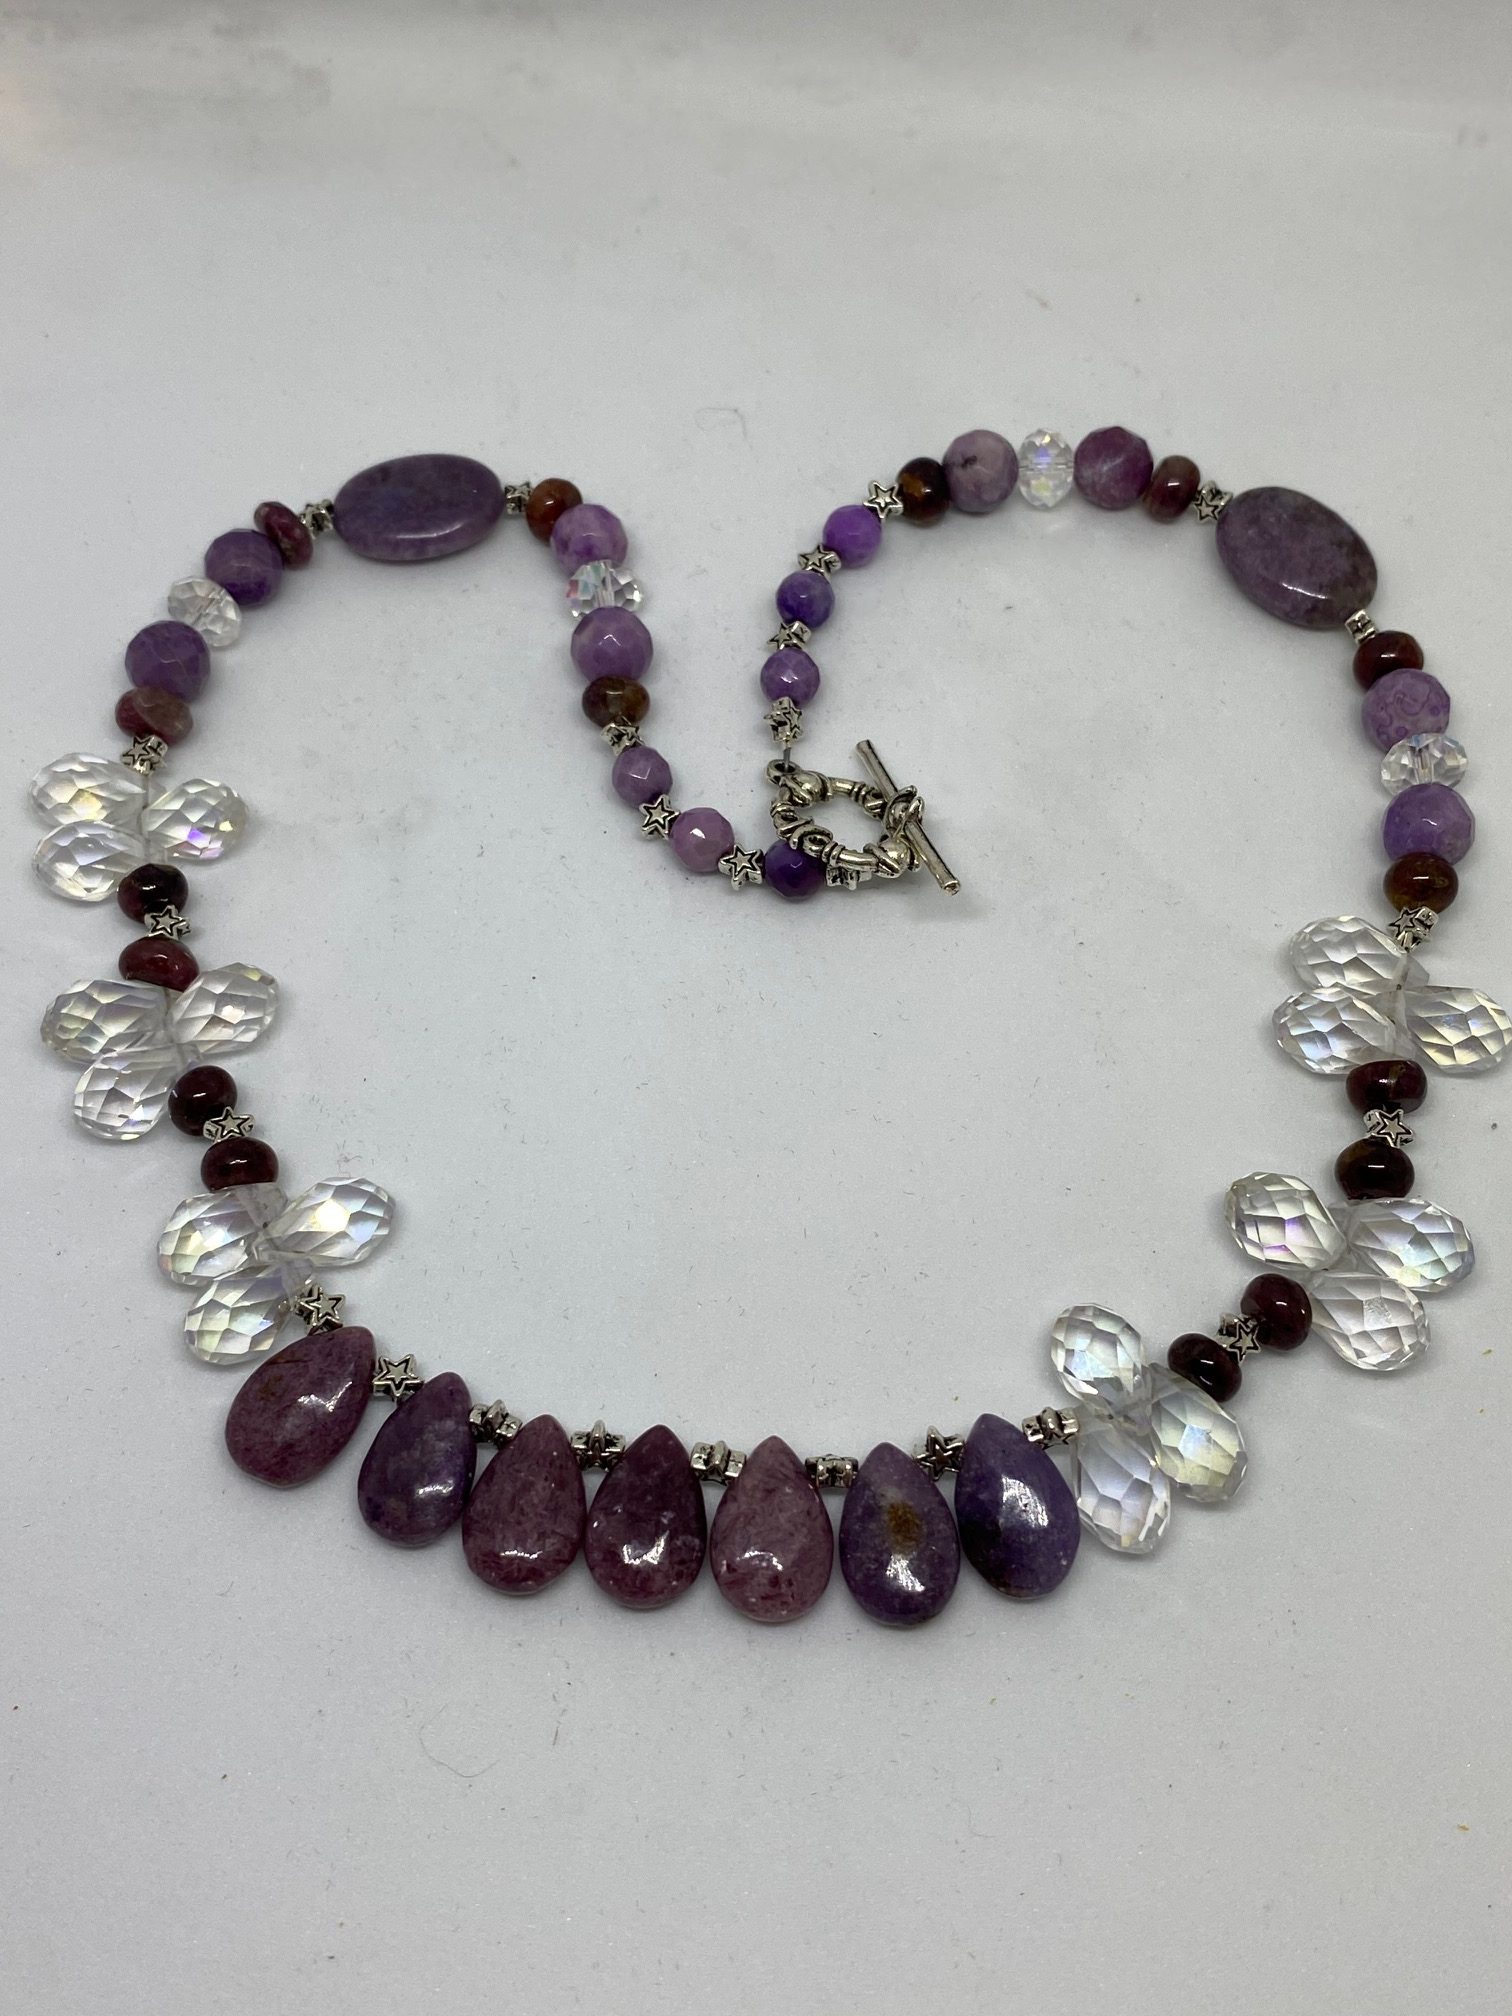 Lepidolite, Swarovski Crystal, and Garnet Necklace This necklace supports Serenity, Prosperity, and Joy.